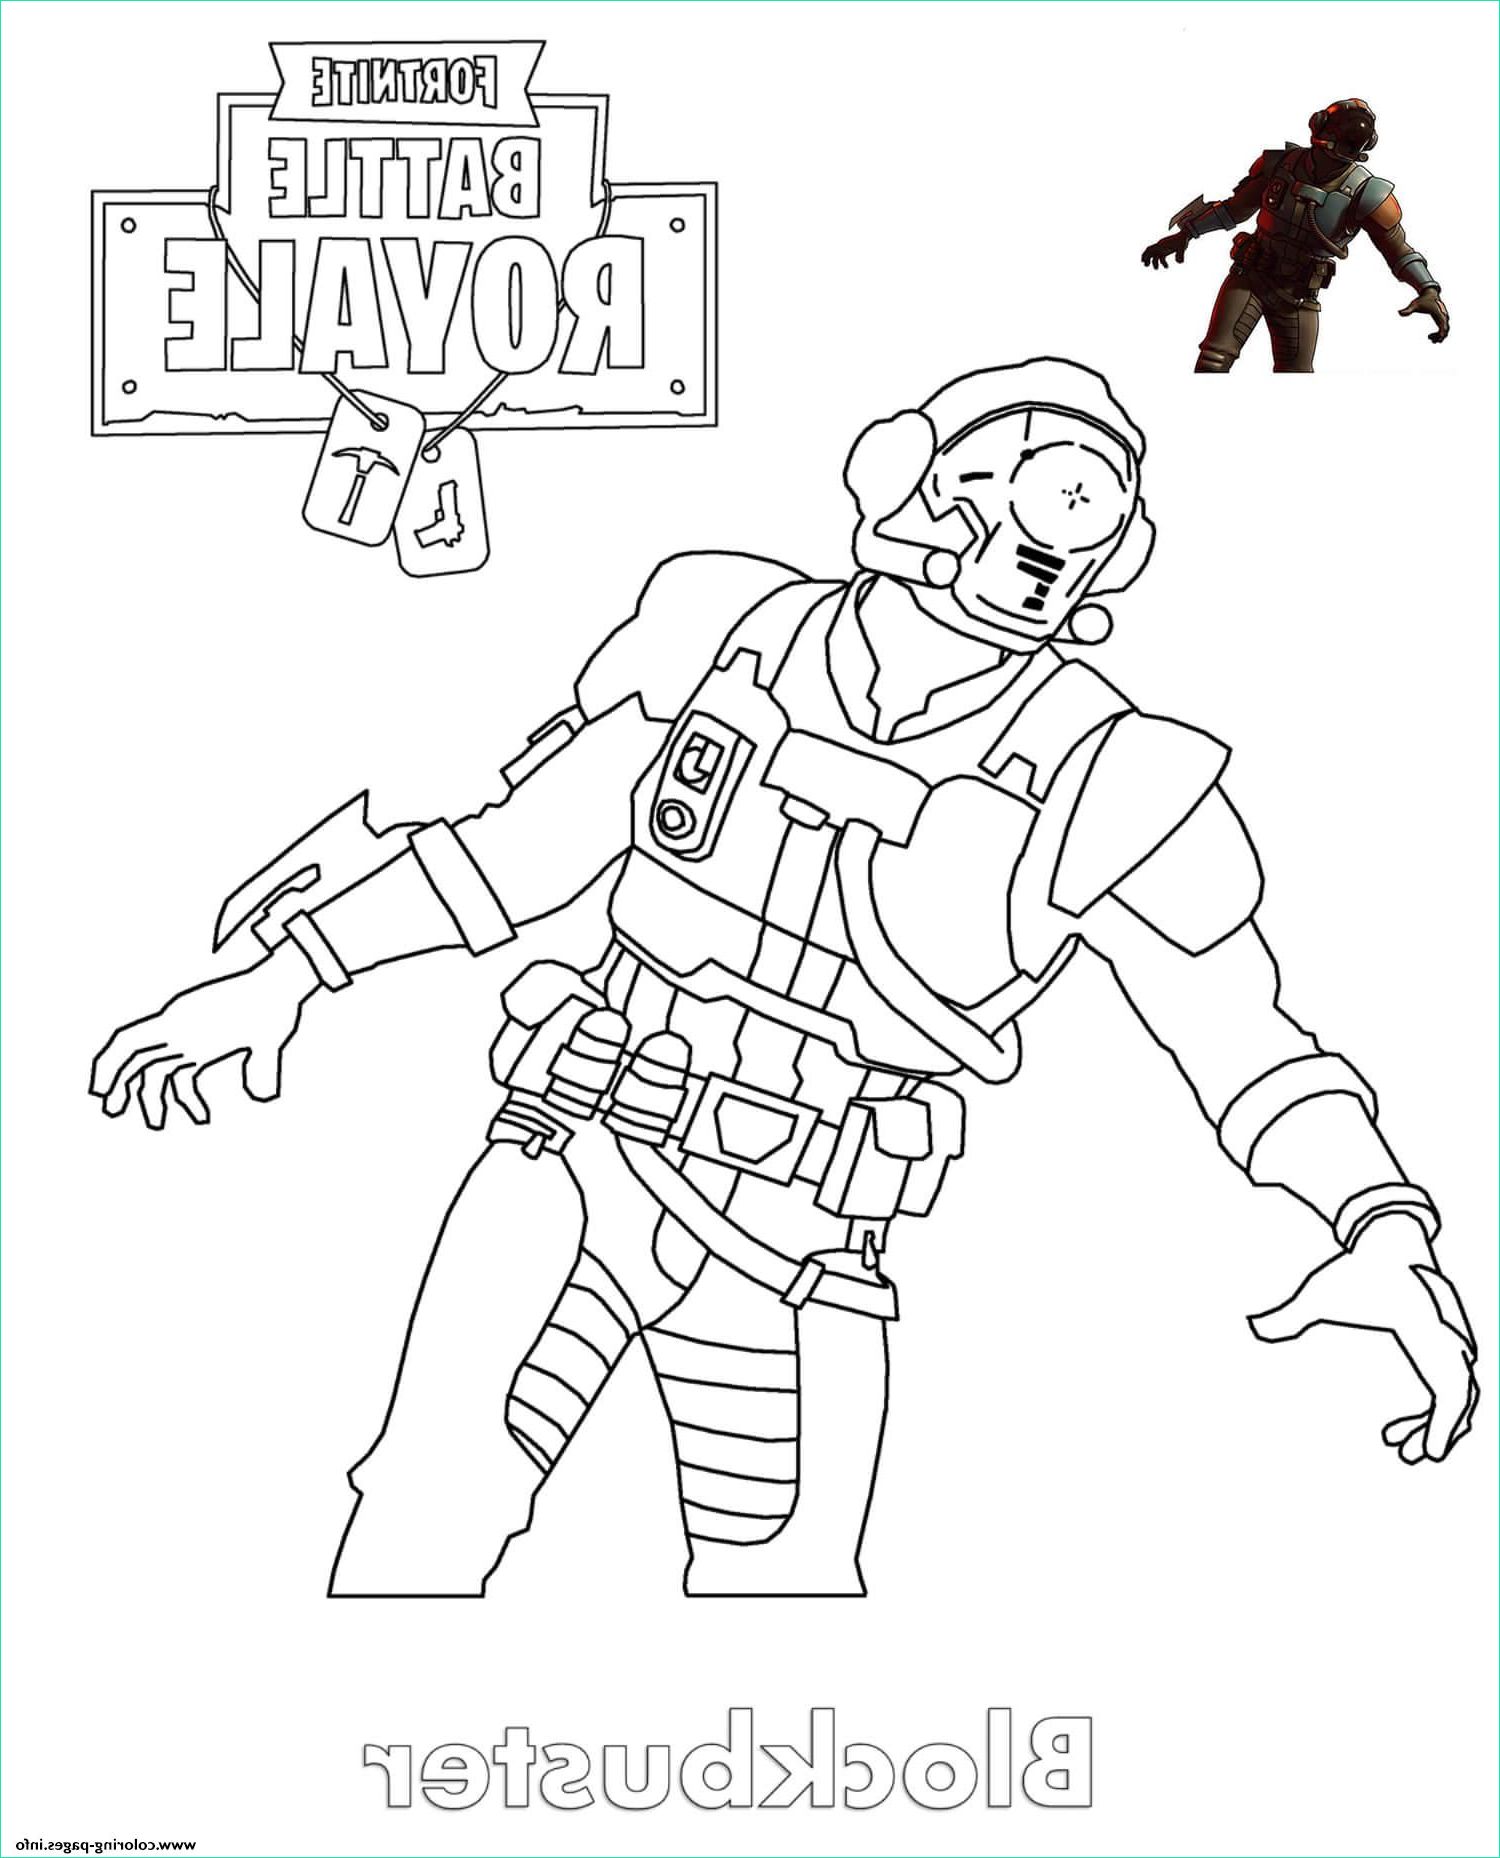 fortnite raven skin coloring pages